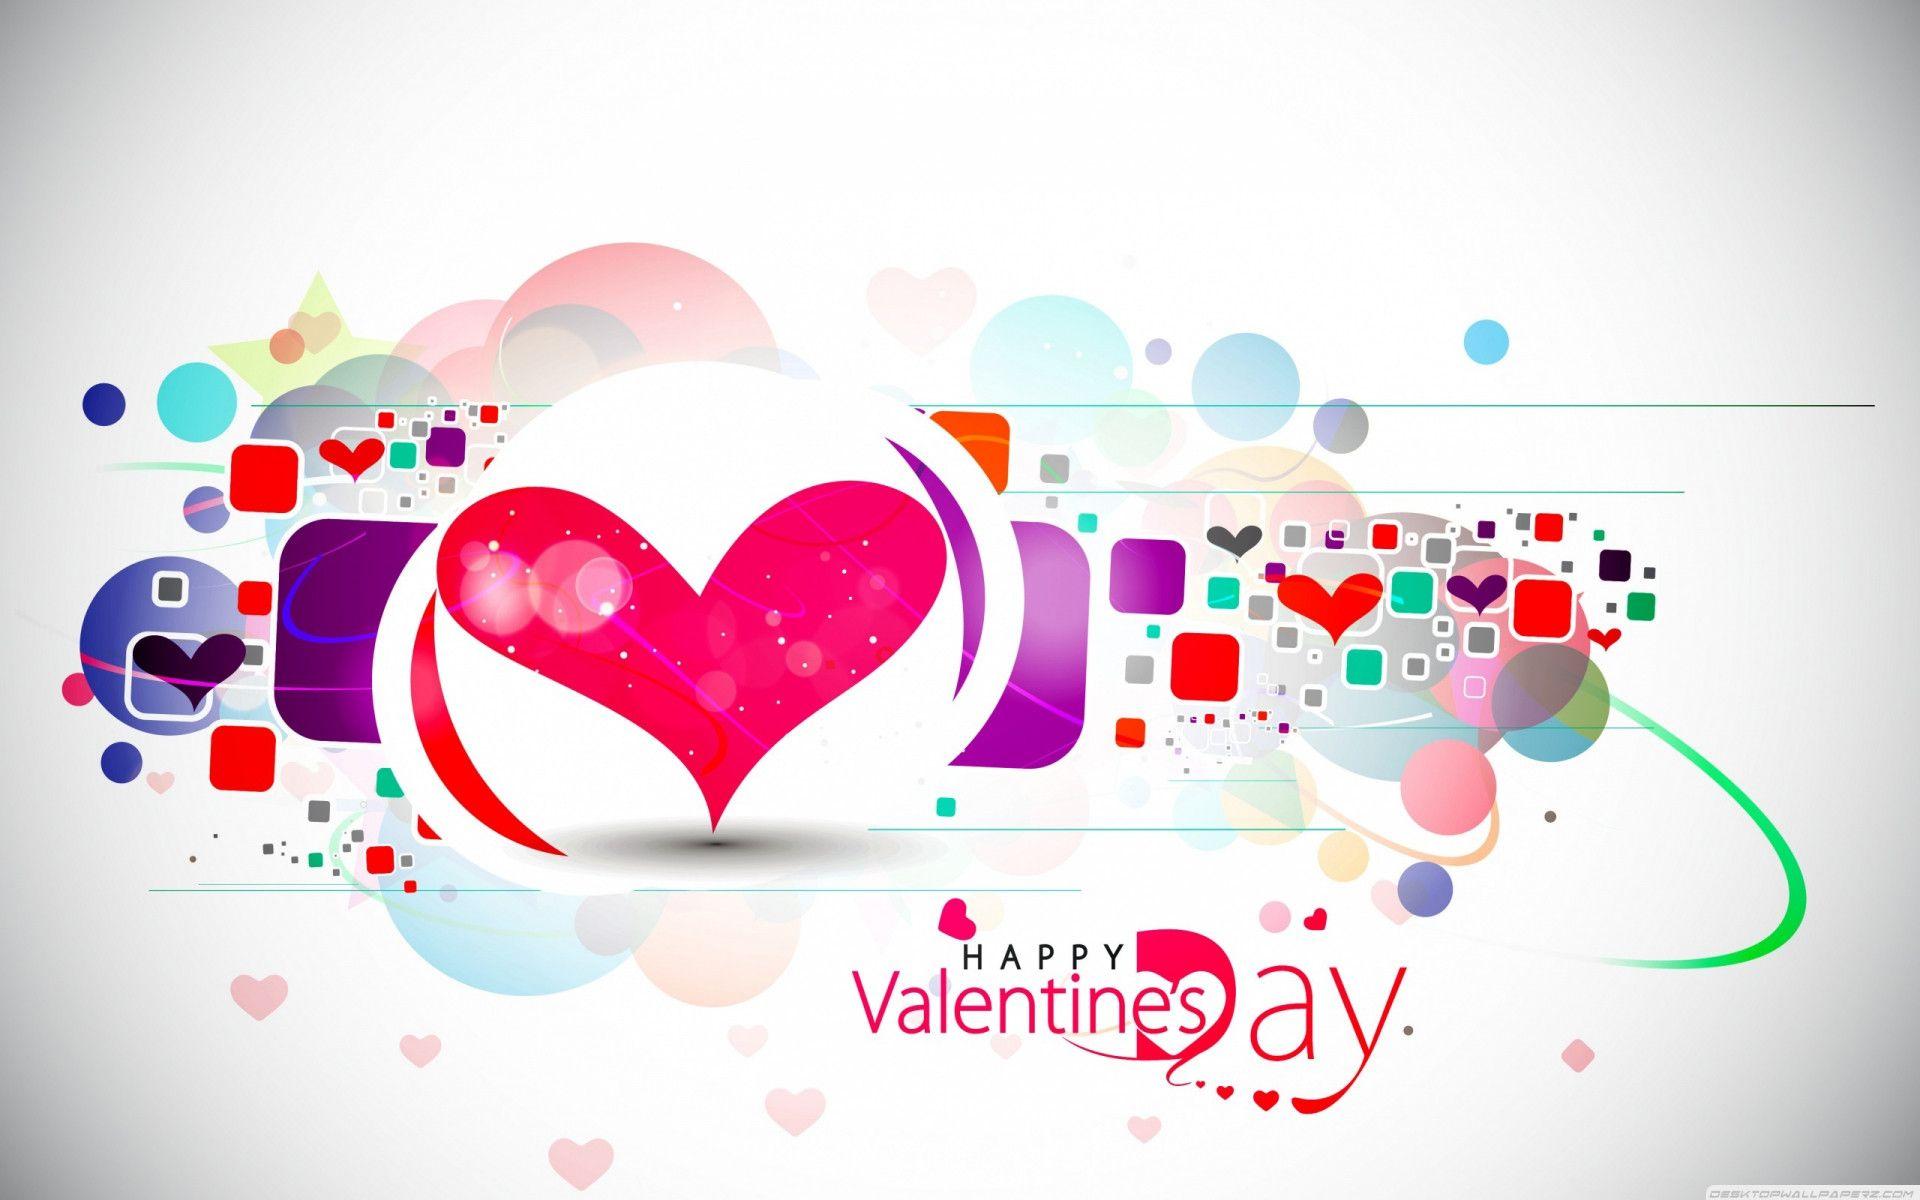 Valentines Day 2014 Gifts HD Wallpaper For Desktop Background